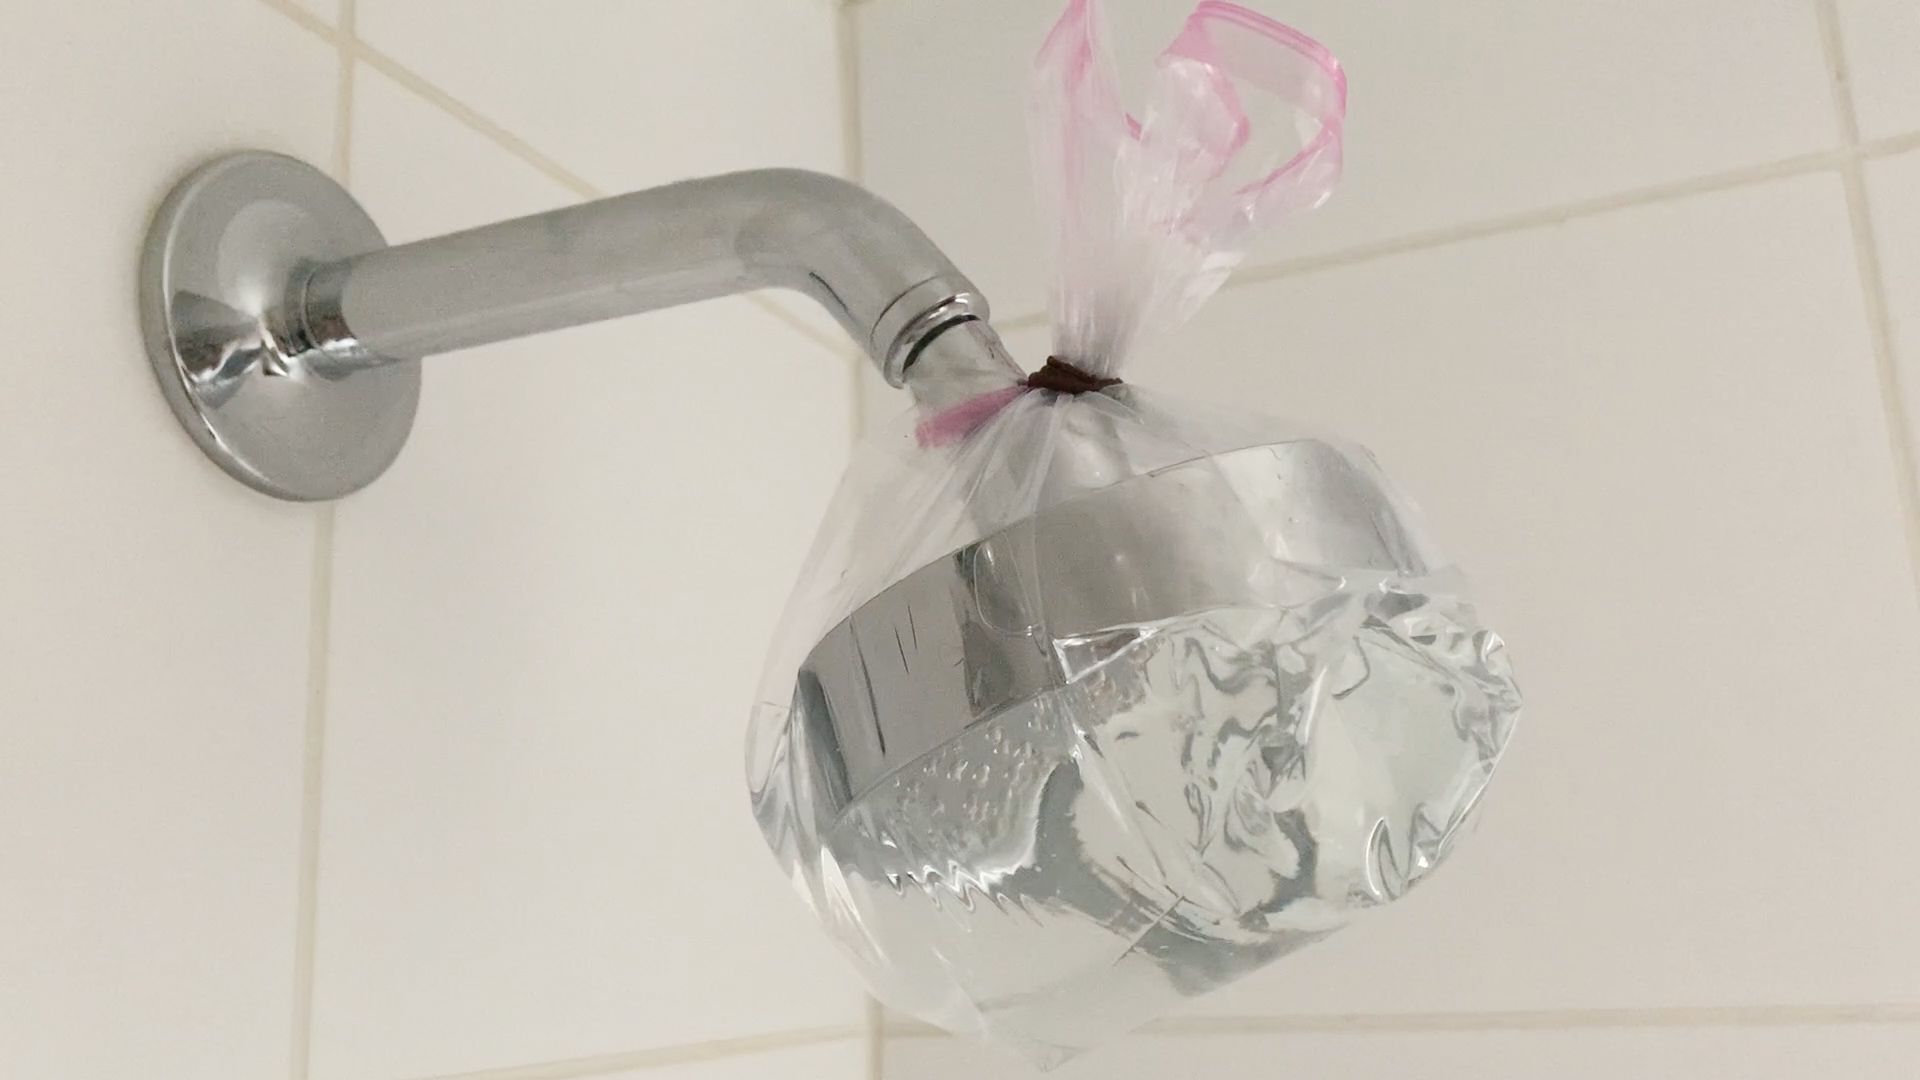 How to Properly Clean Shower Heads - Cleaning Hacks For The Home